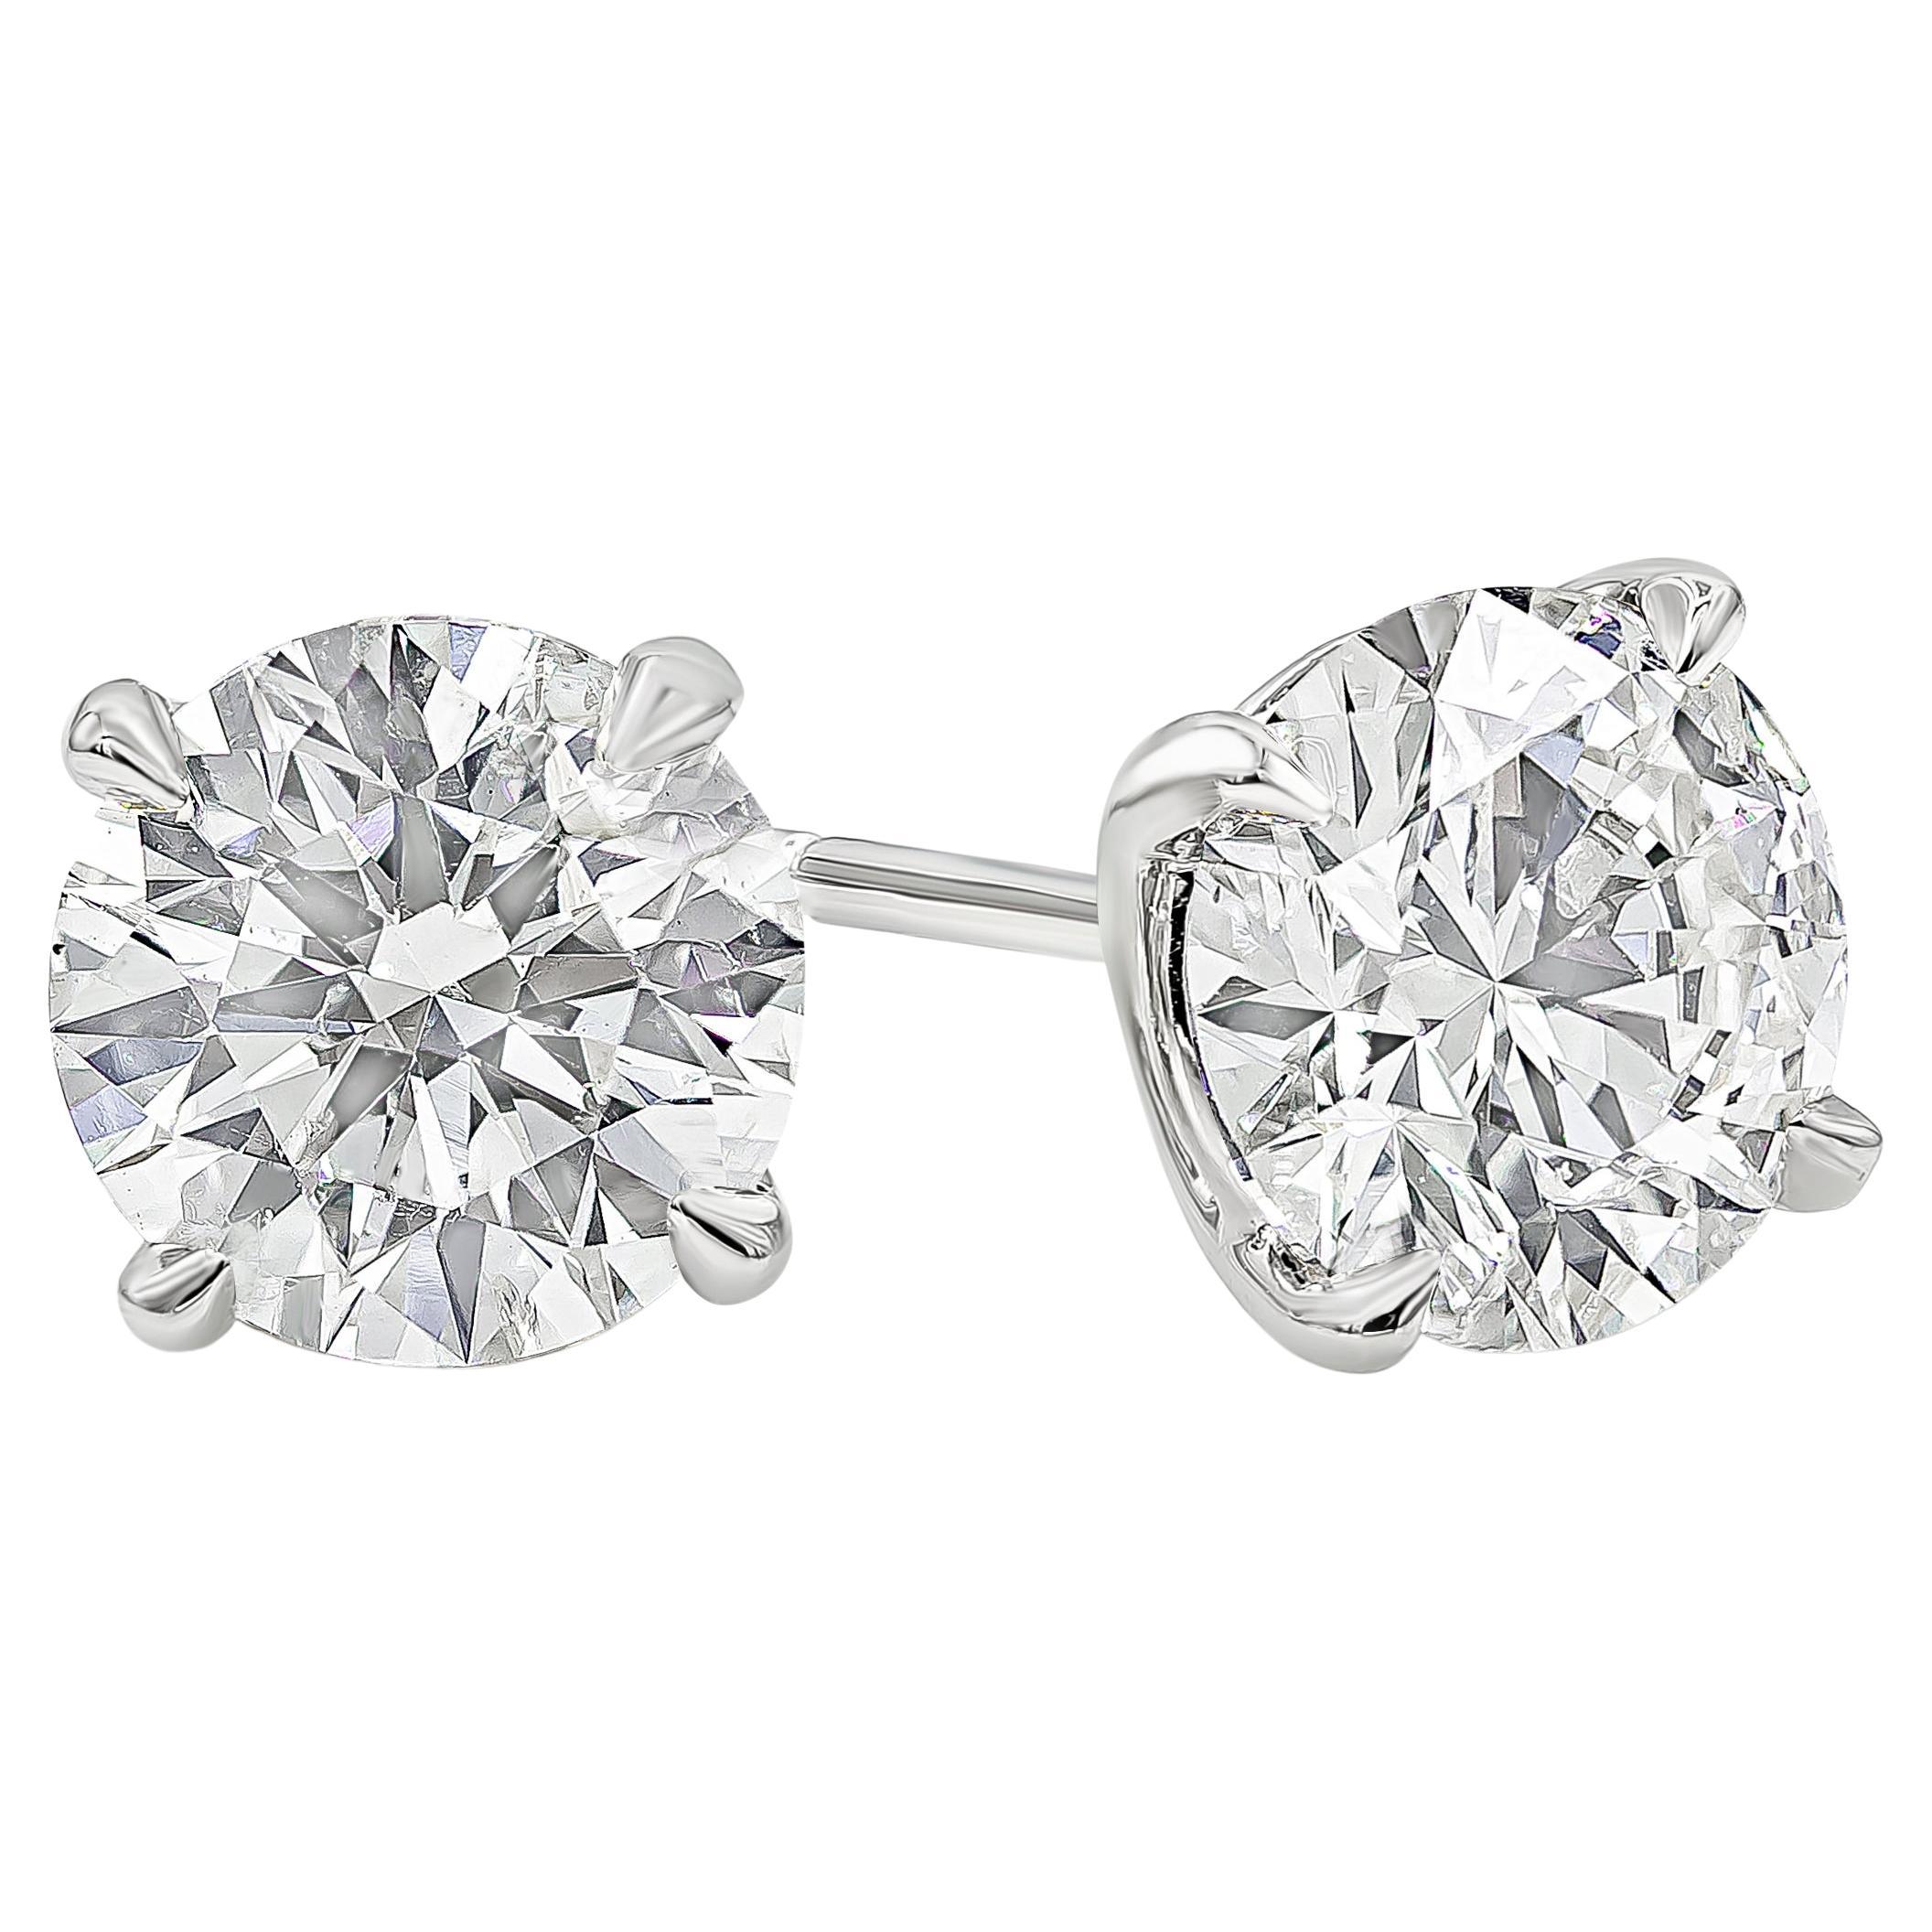 GIA Certified 4.03 Carats Total Brilliant Round Diamond Stud Earrings For Sale